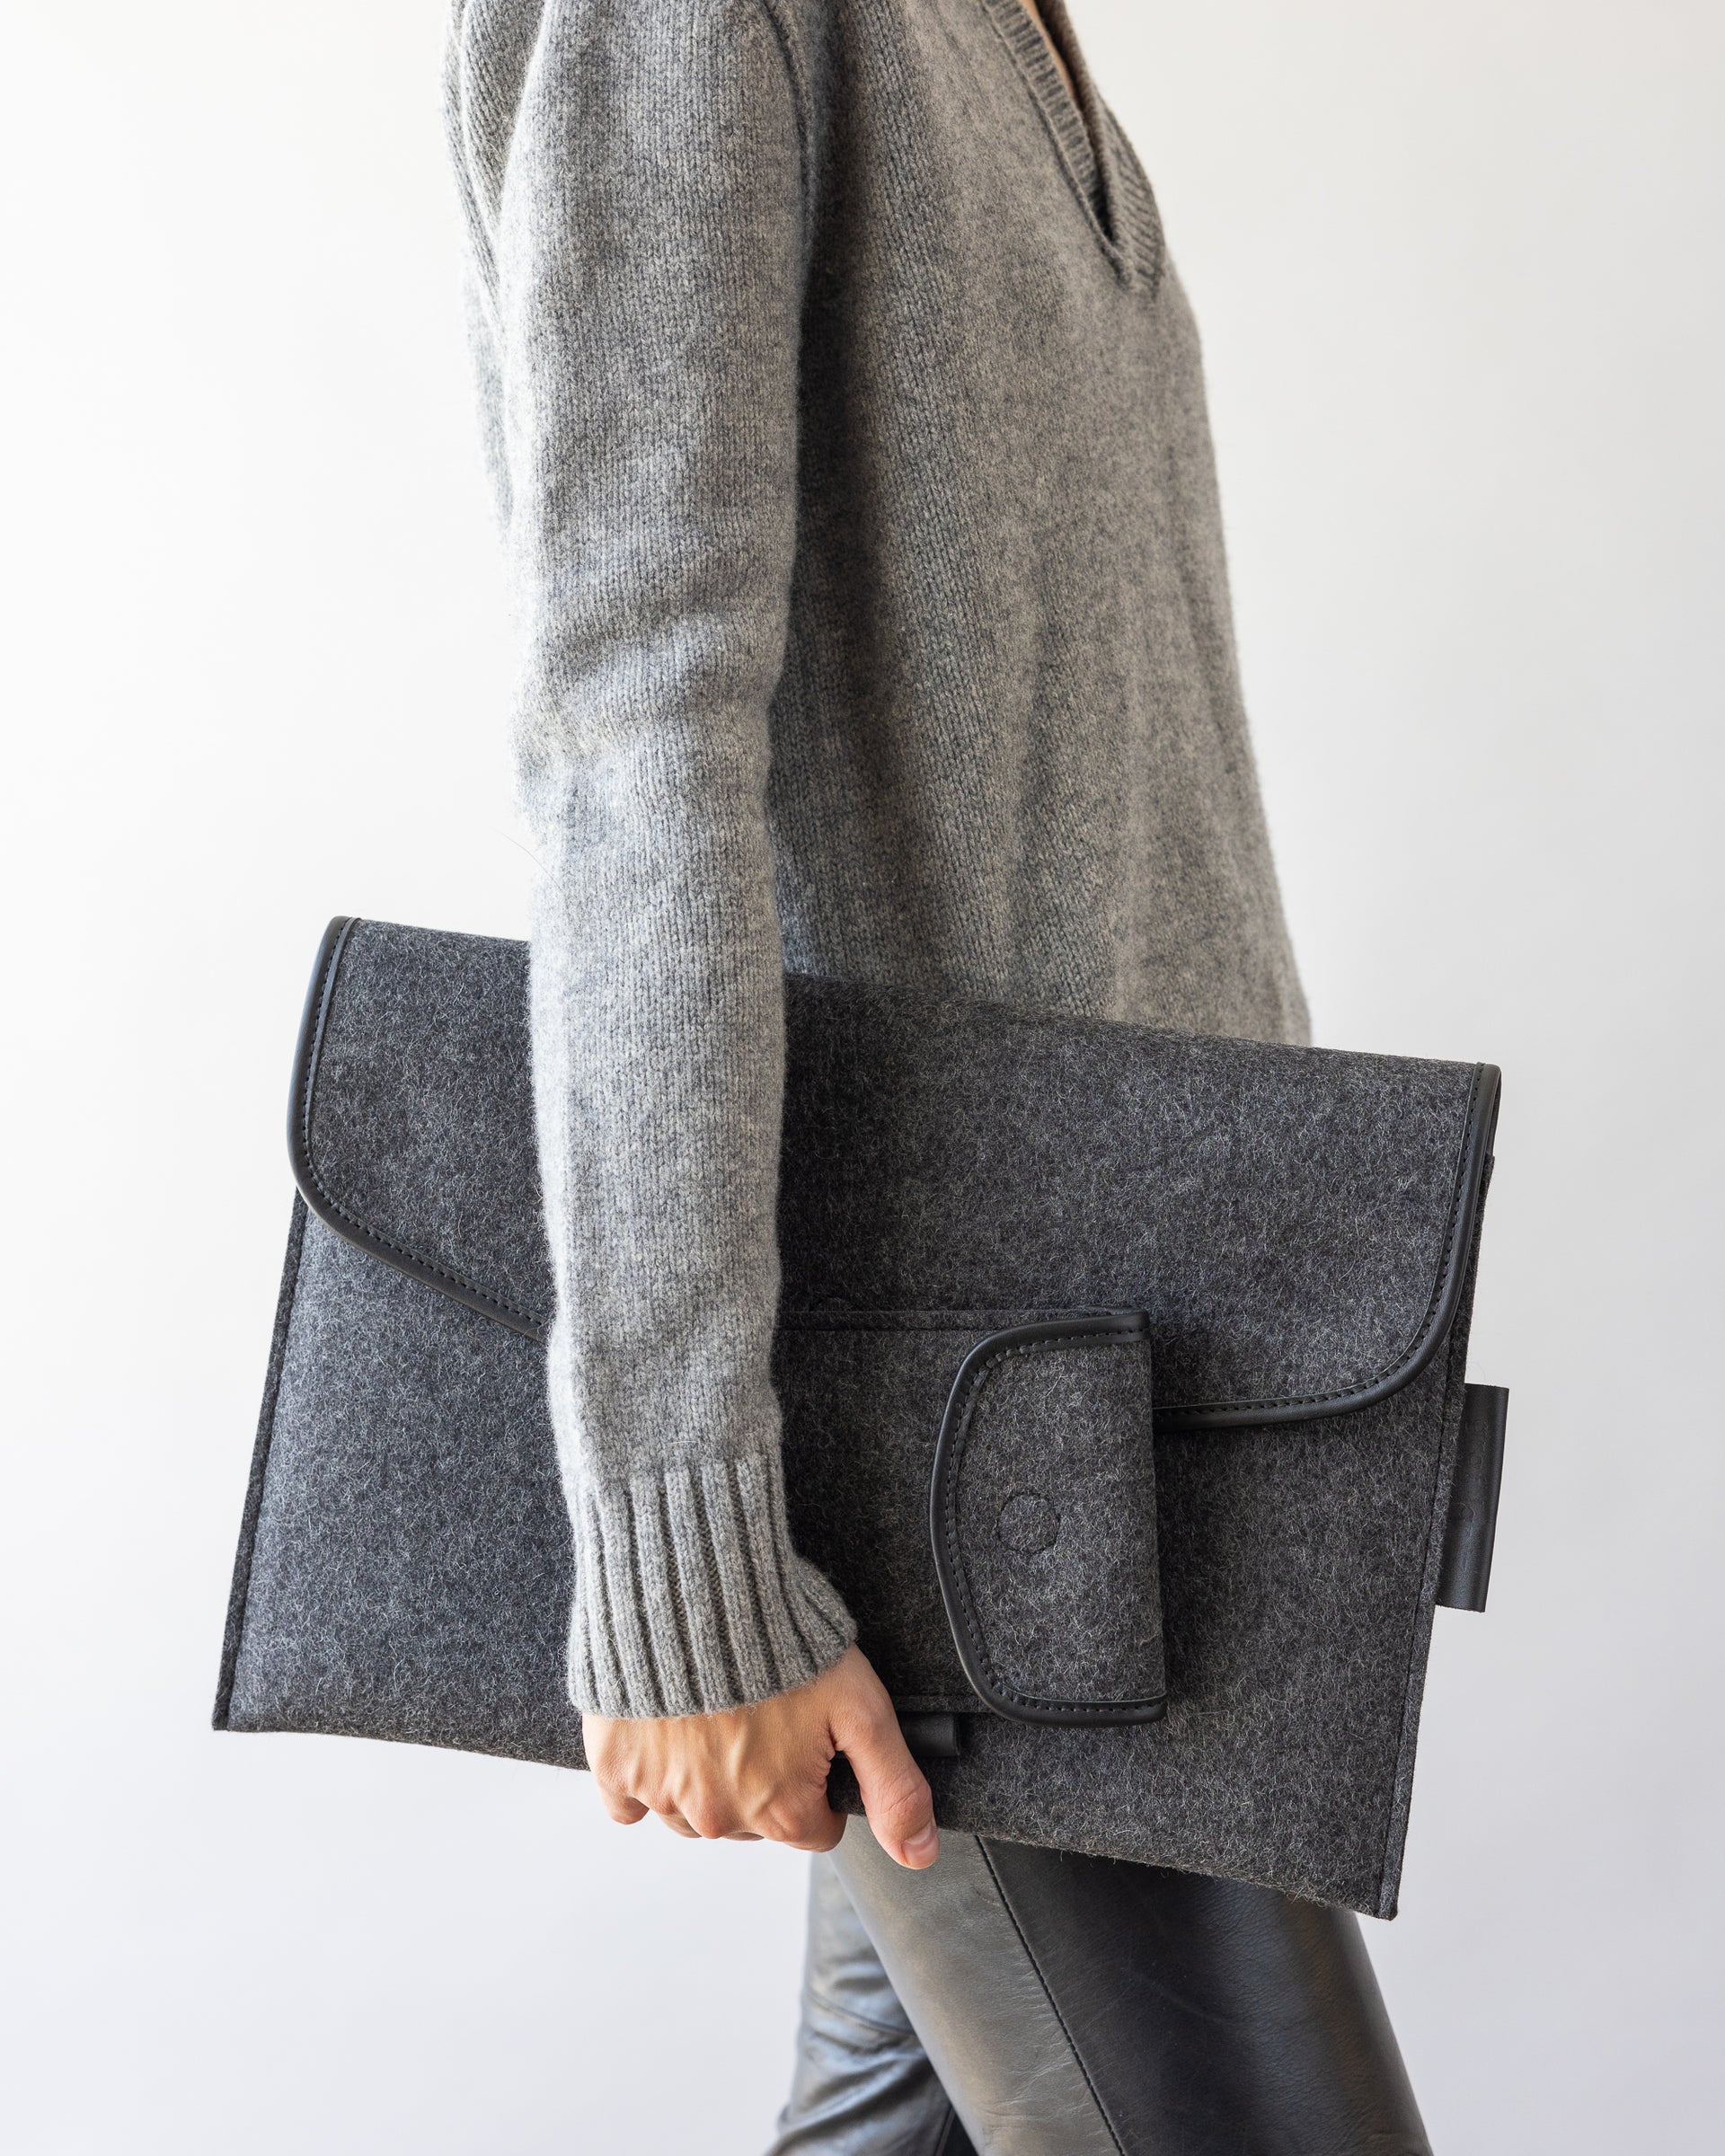 Envelope Merino Wool Tech Sleeve and Envelope Accessory Sleeve in charcoal held by a stylish woman in one hand by her side